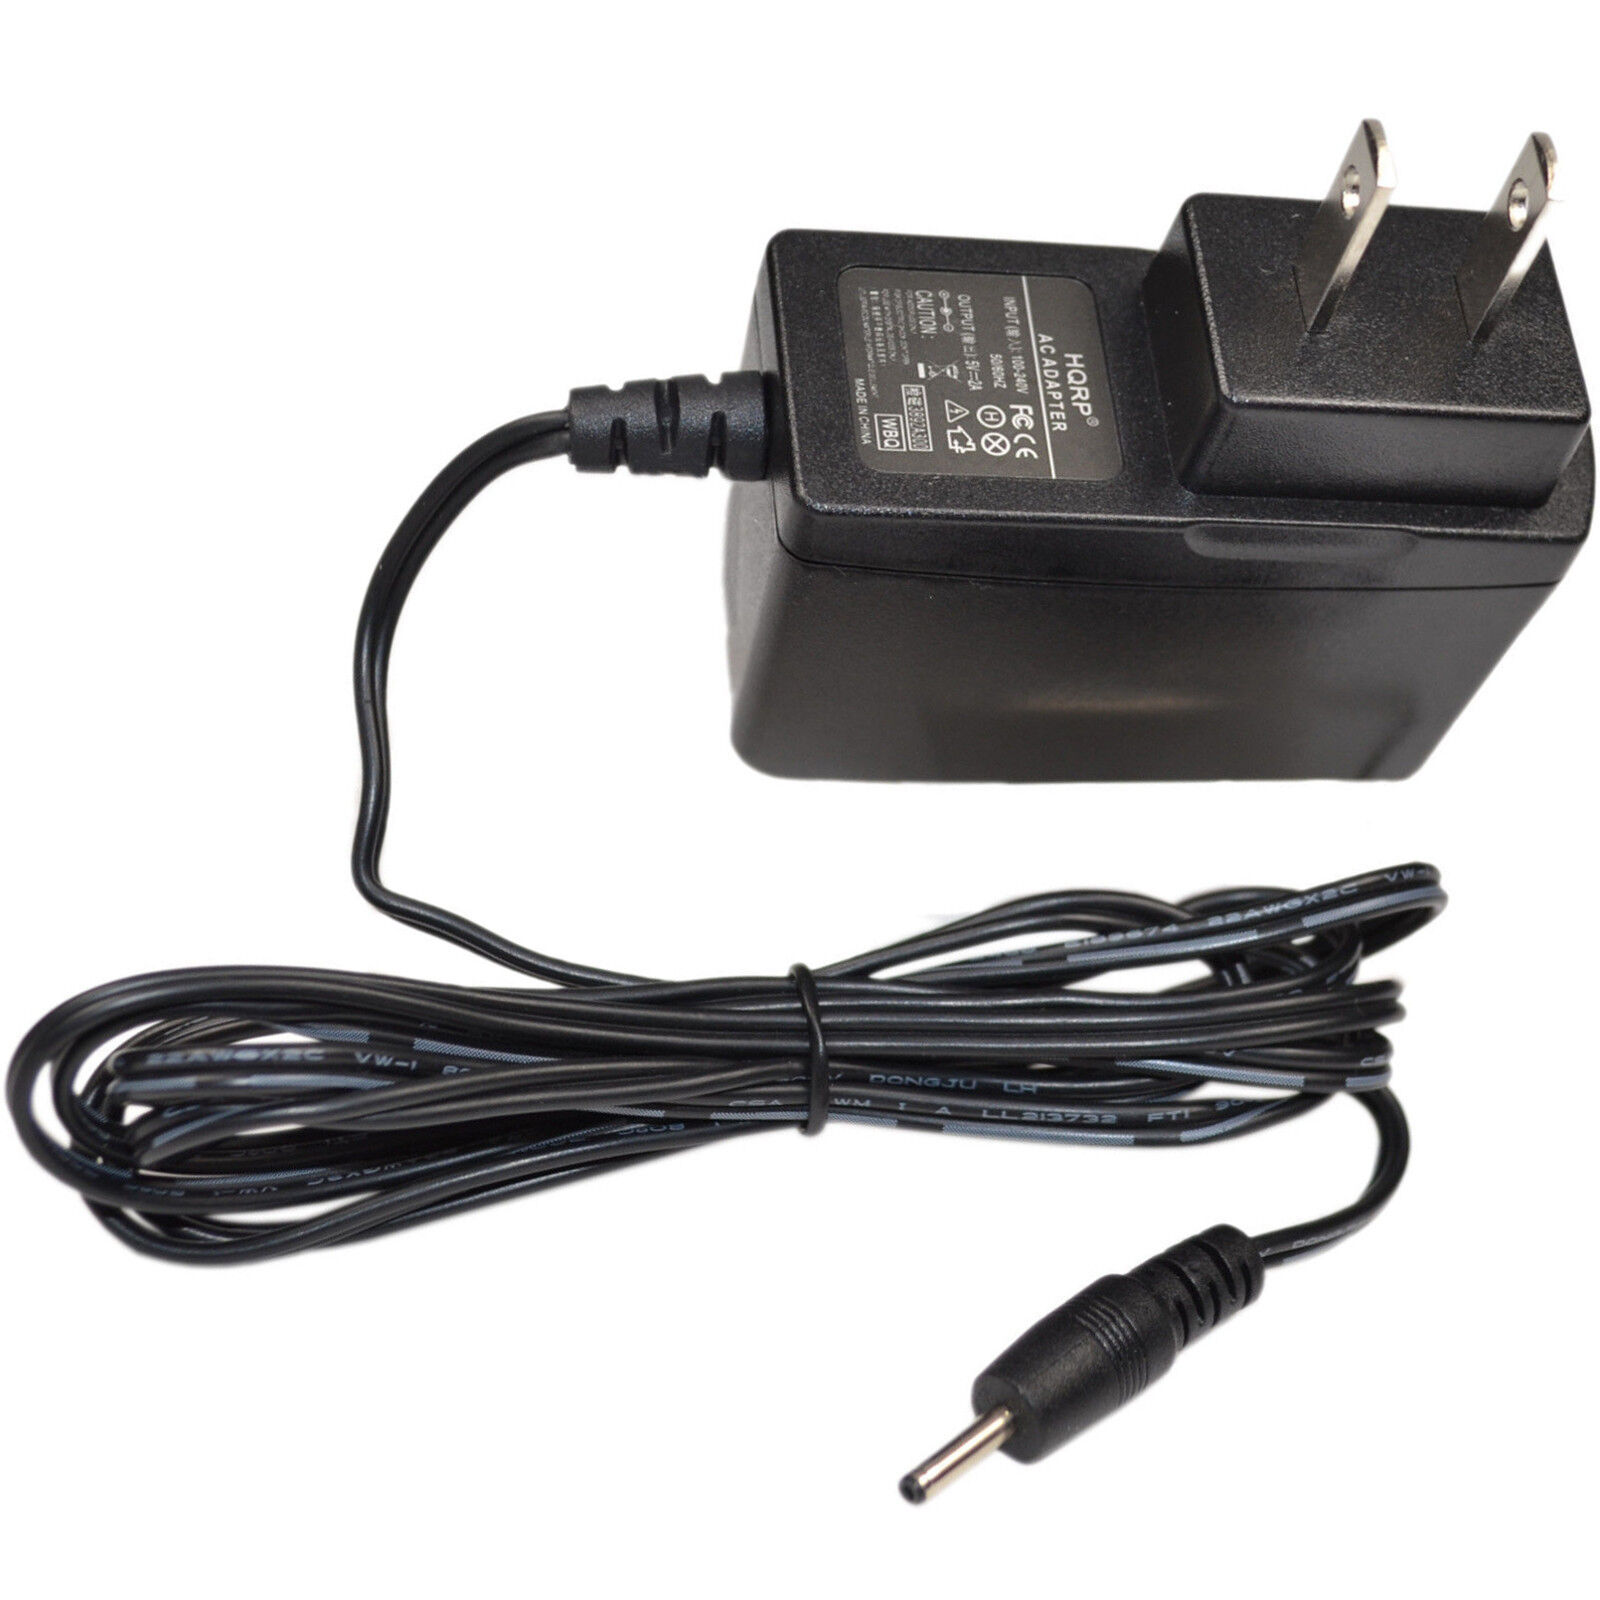 AC Wall Adapter Charger for Fuhu NABI NABI-2 NABI2-NV7A 7-Inch Android Tablet PC